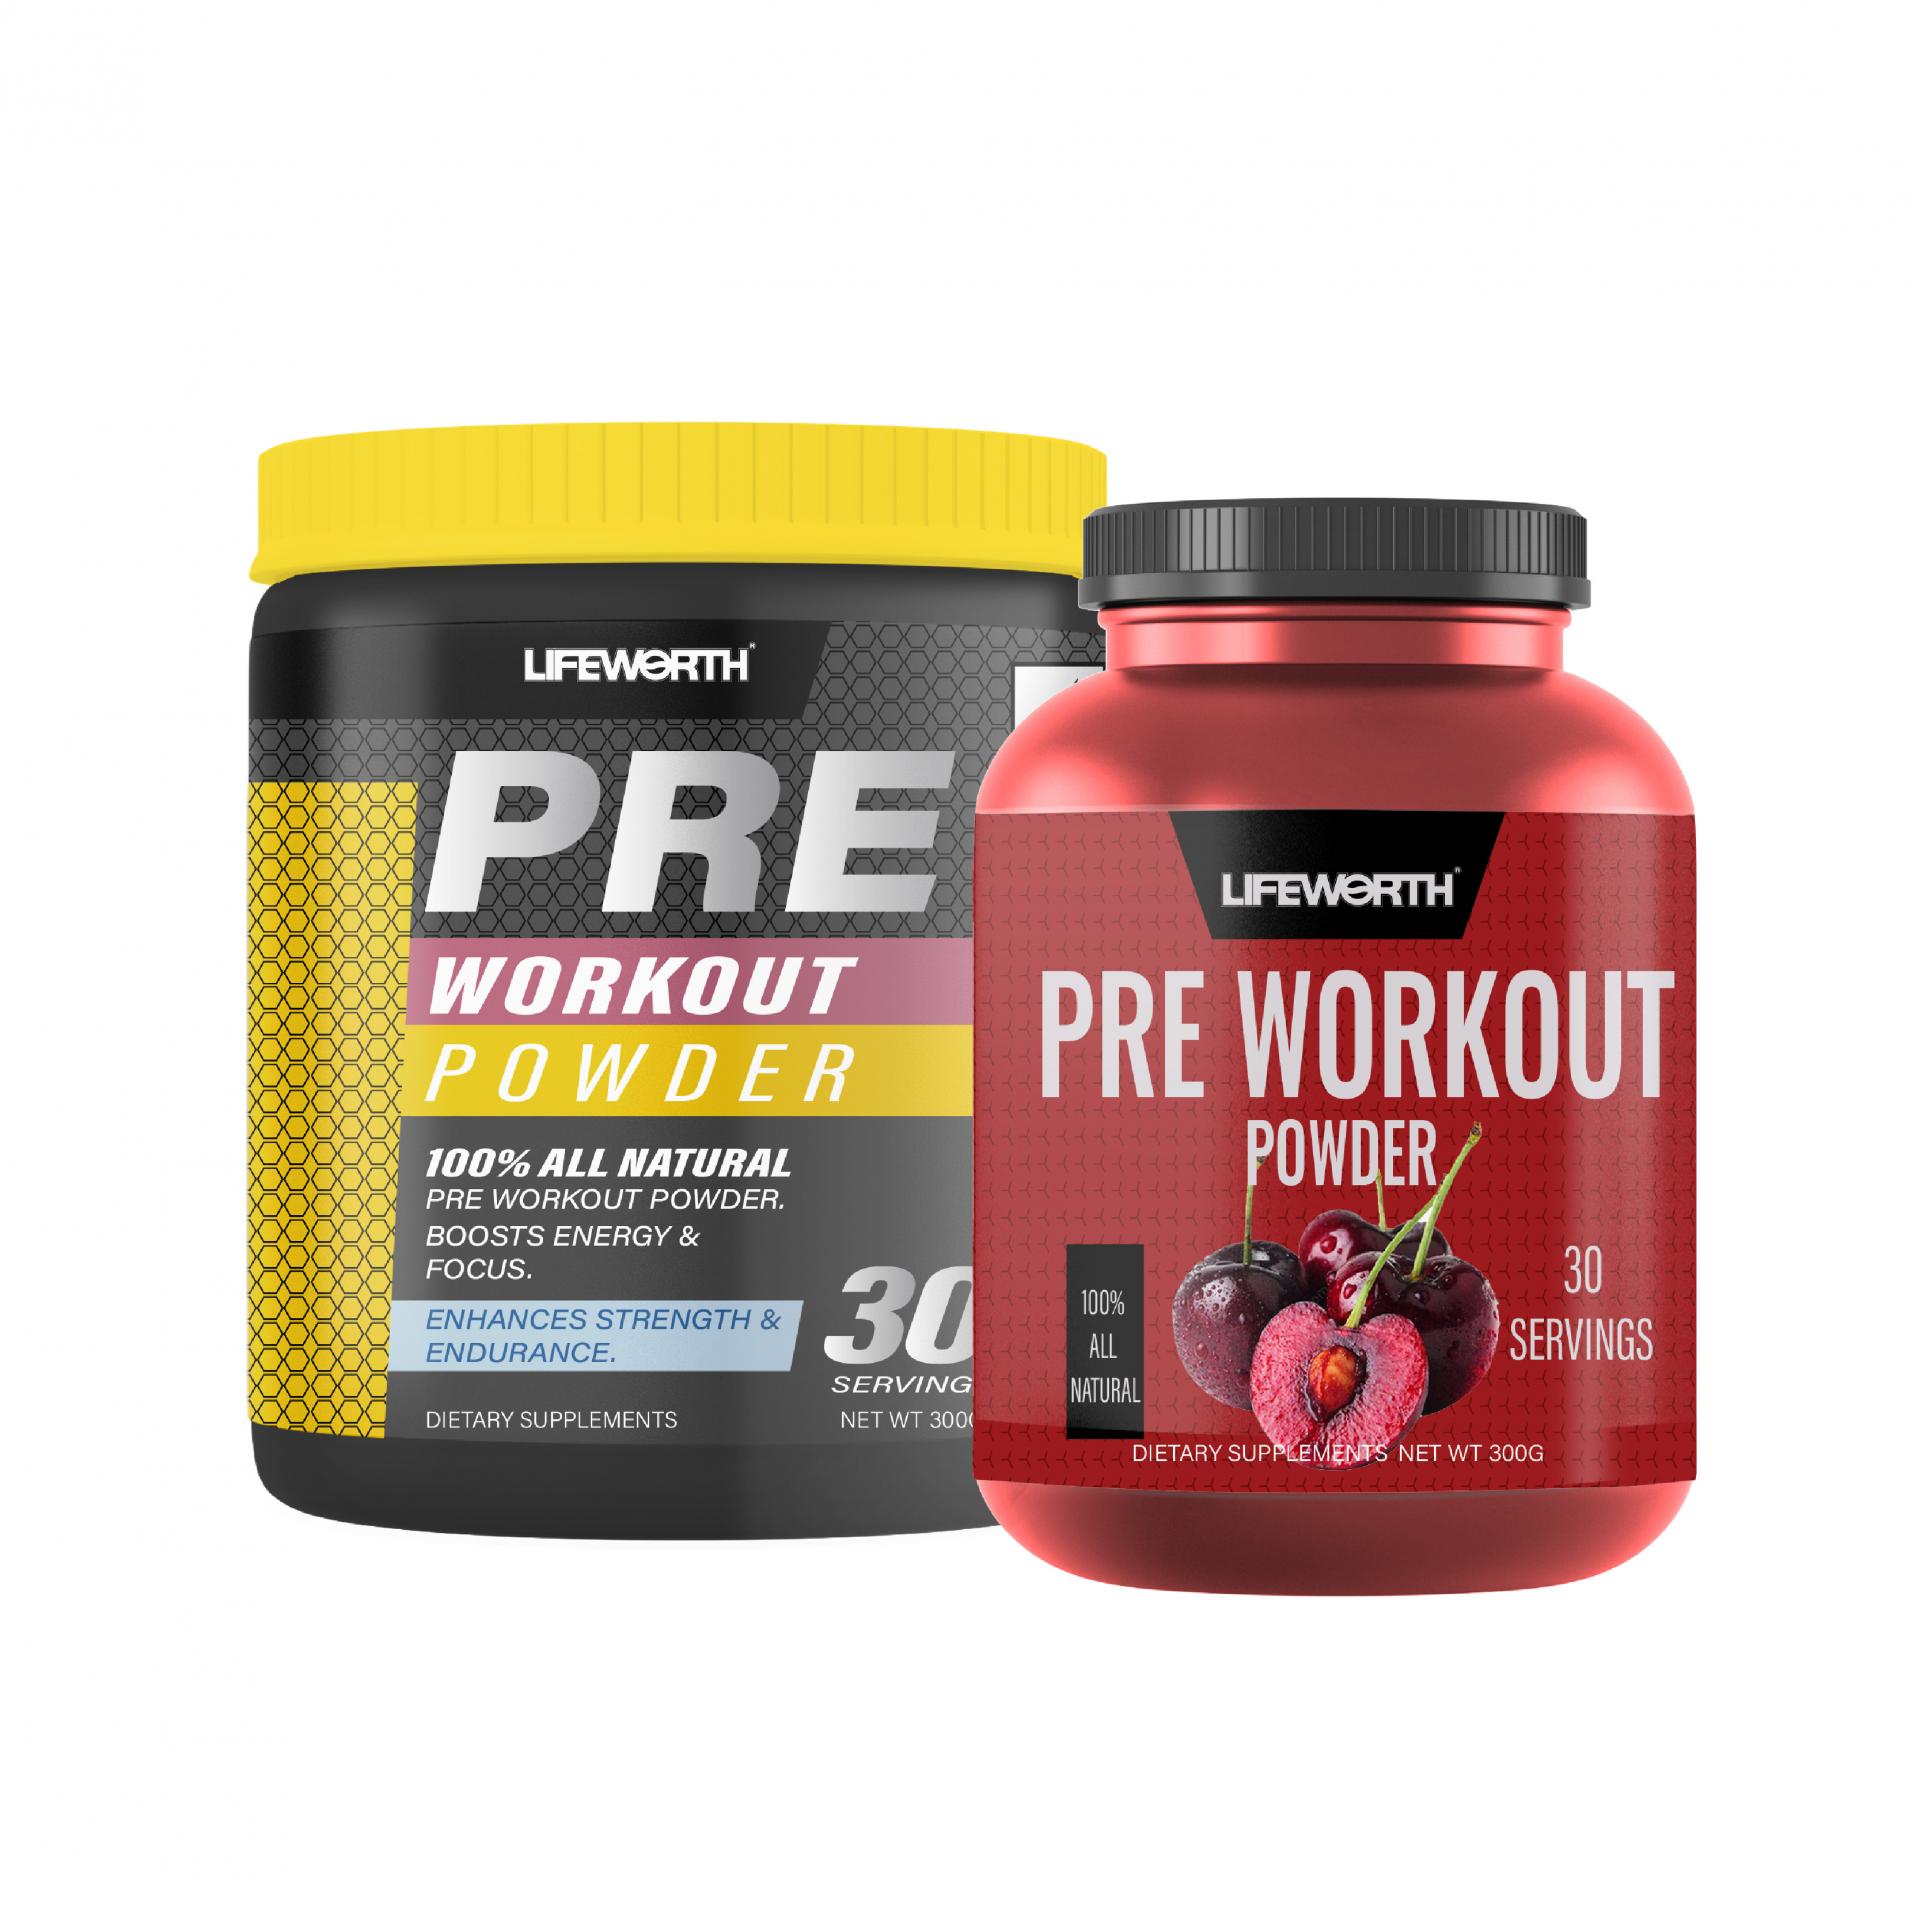 Certified for Sport Pre-workout for Men and Women